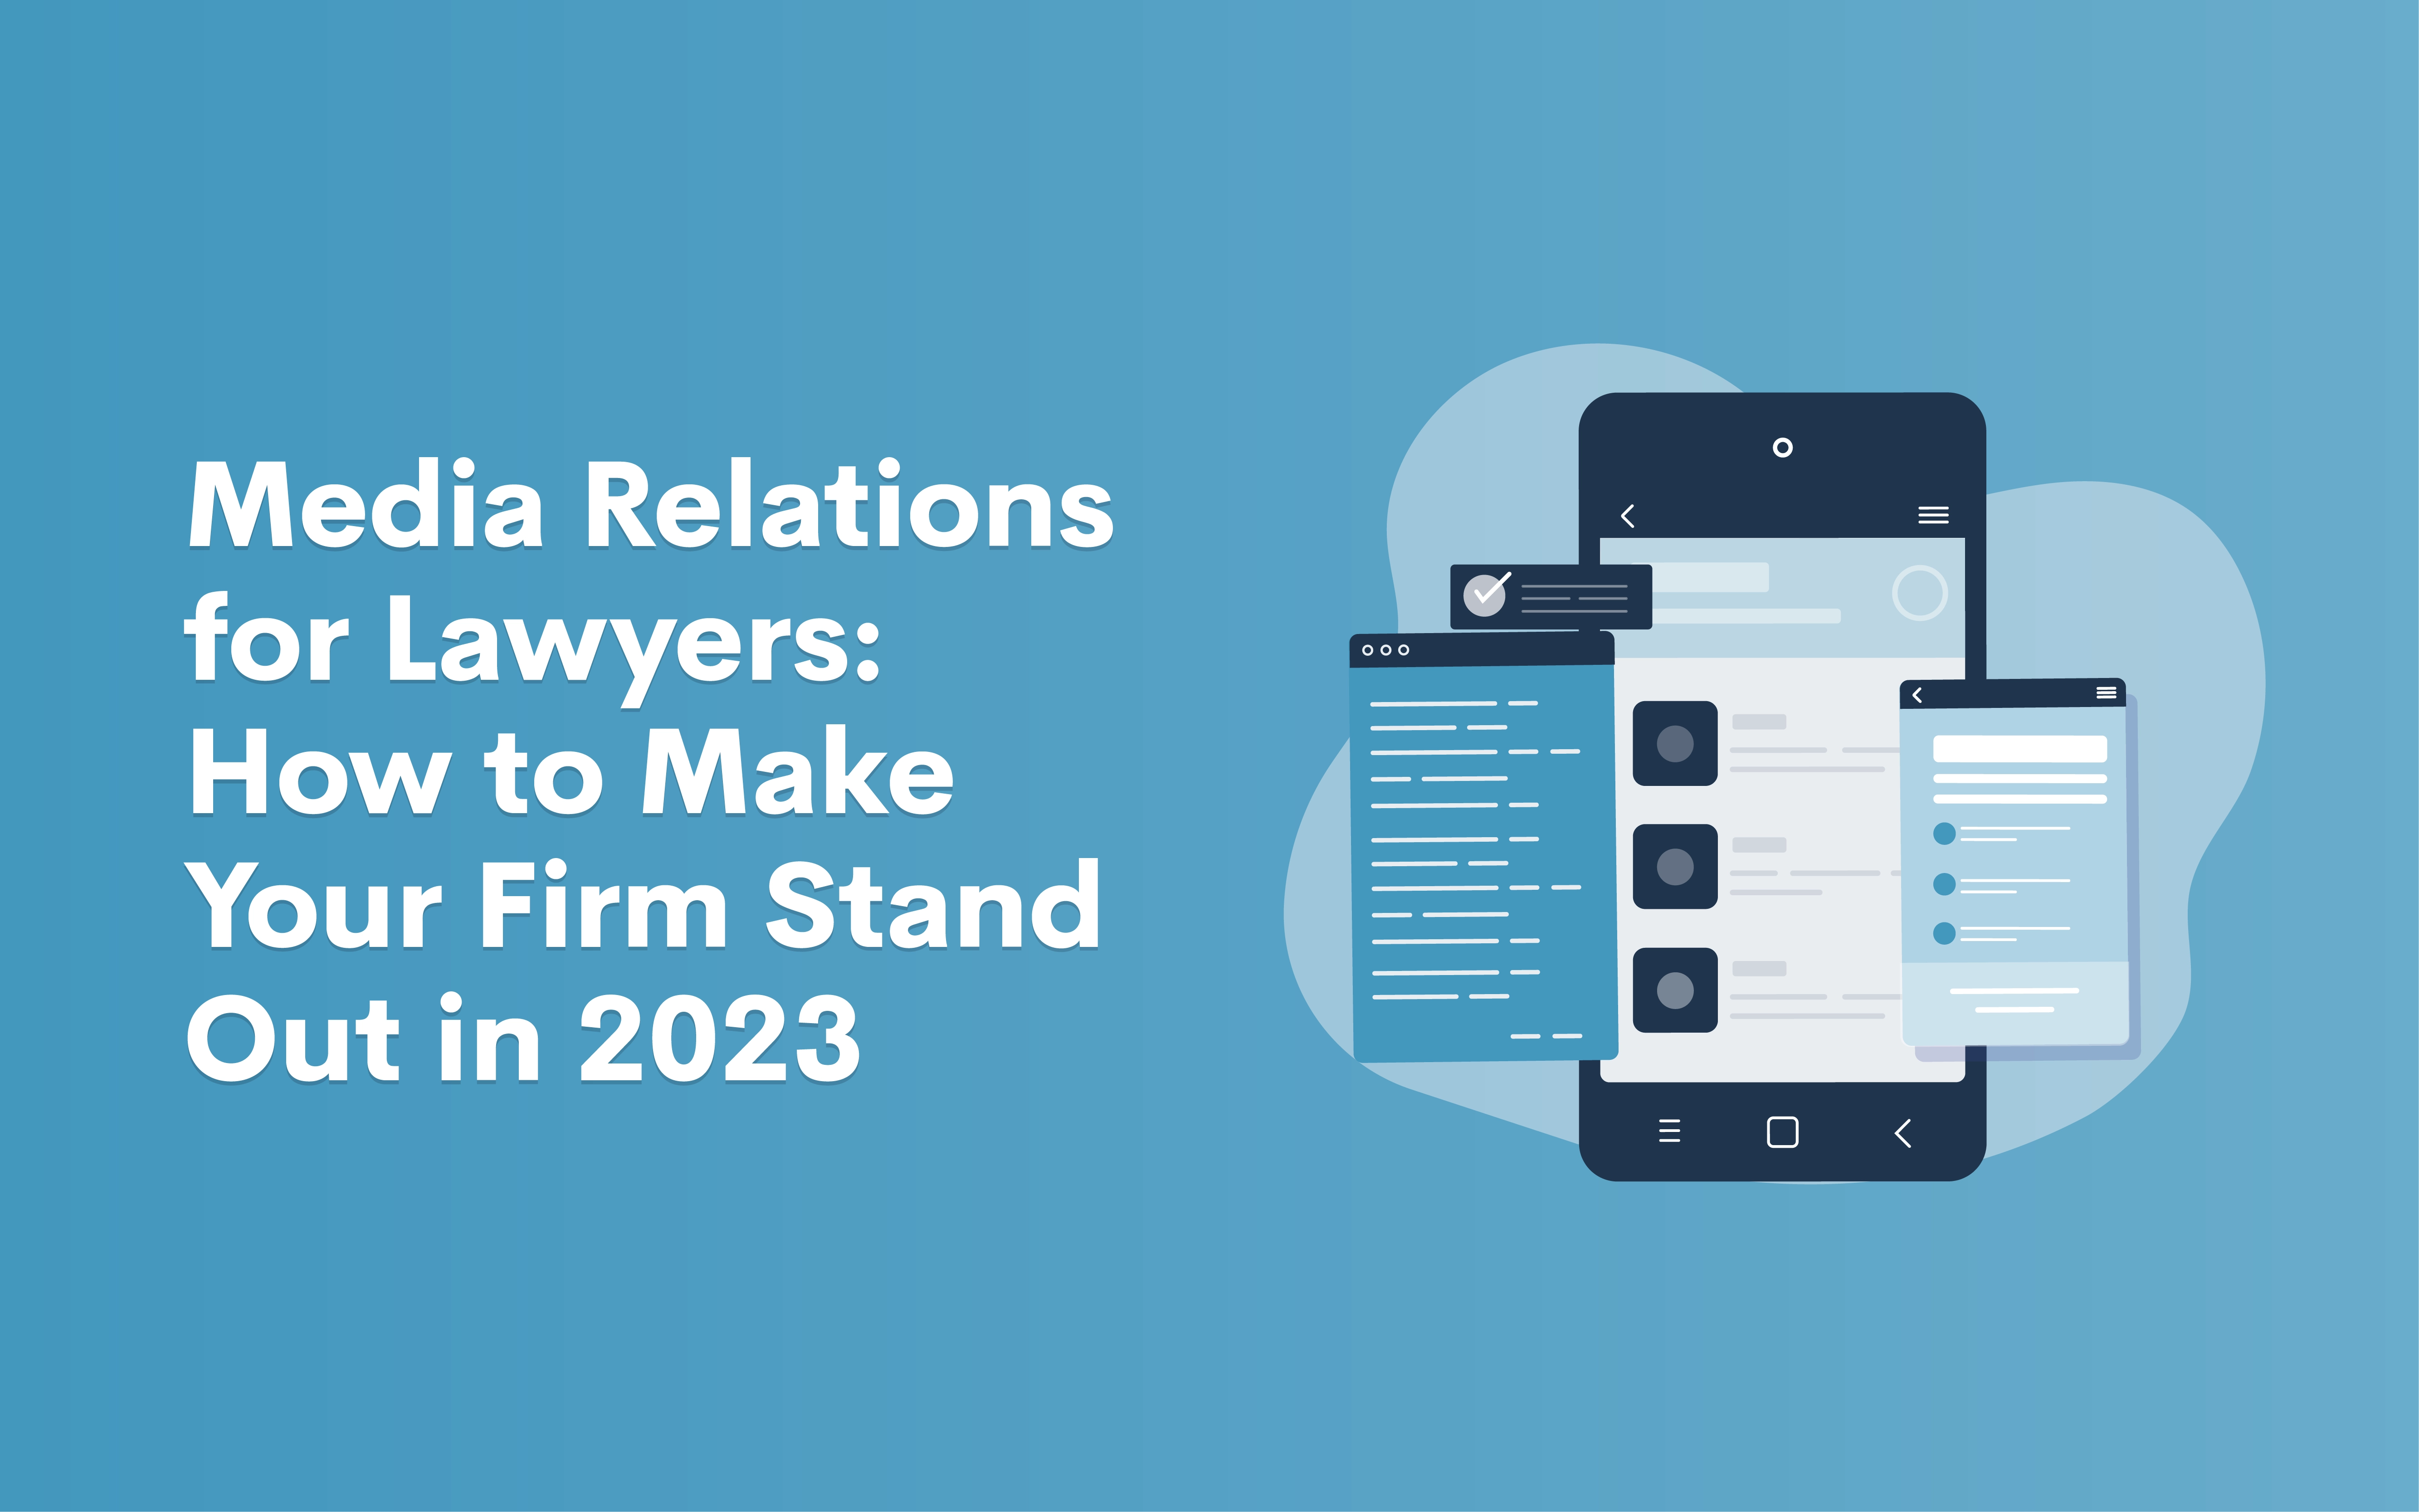 Media Relations for Lawyers: How to Make Your Firm Stand Out in 2023